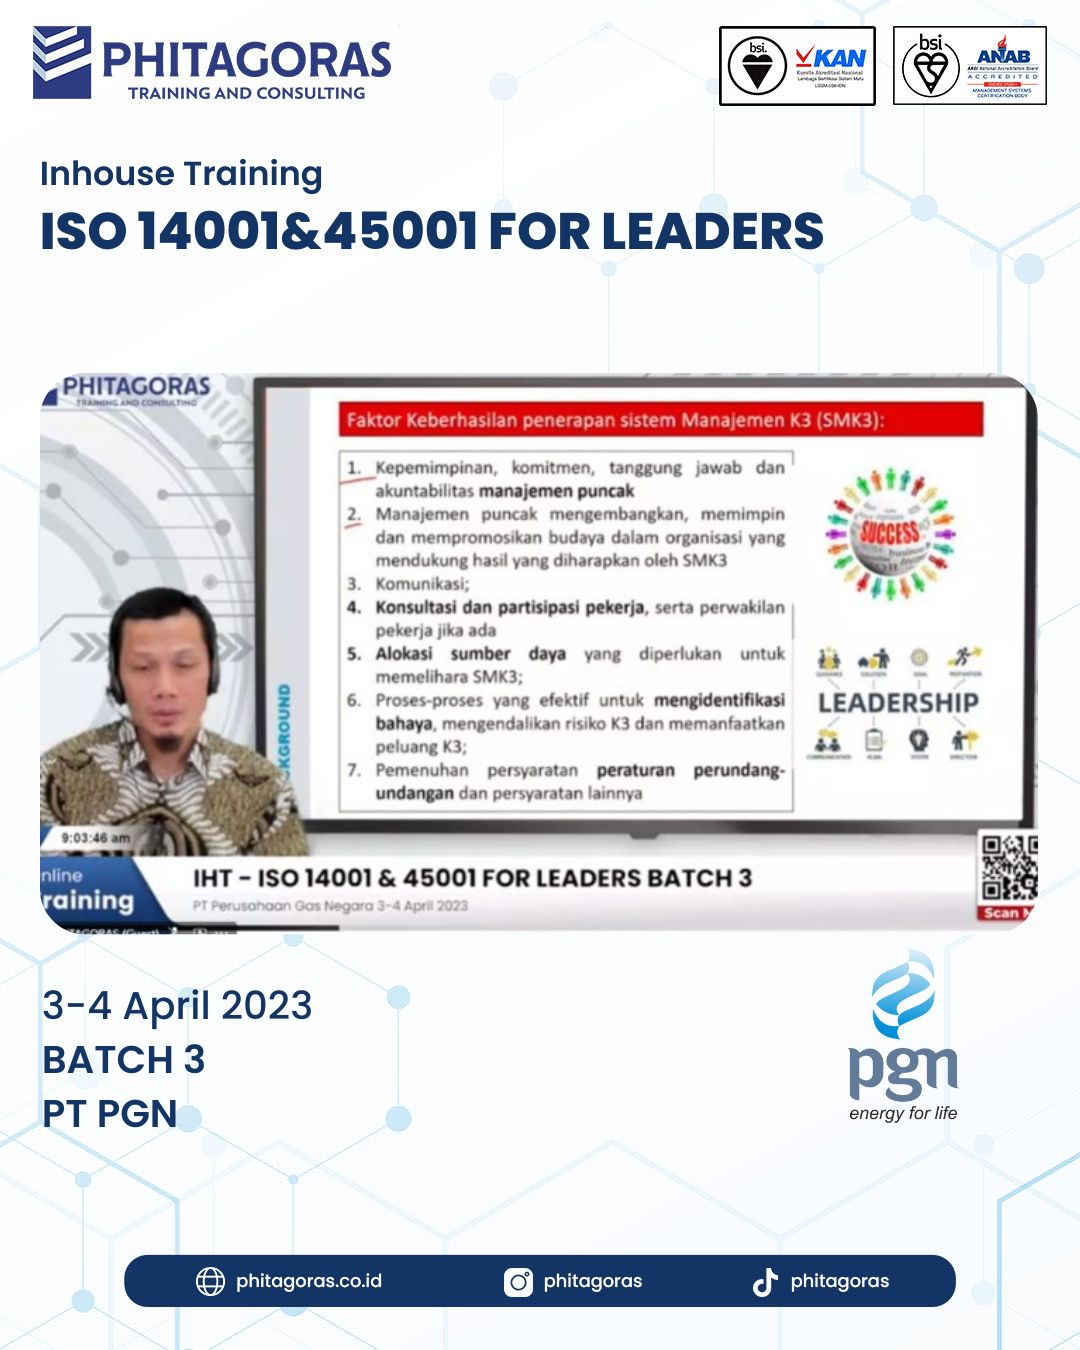 Inhouse Training ISO 14001&45001 FOR LEADERS - PT PGN BATCH 3